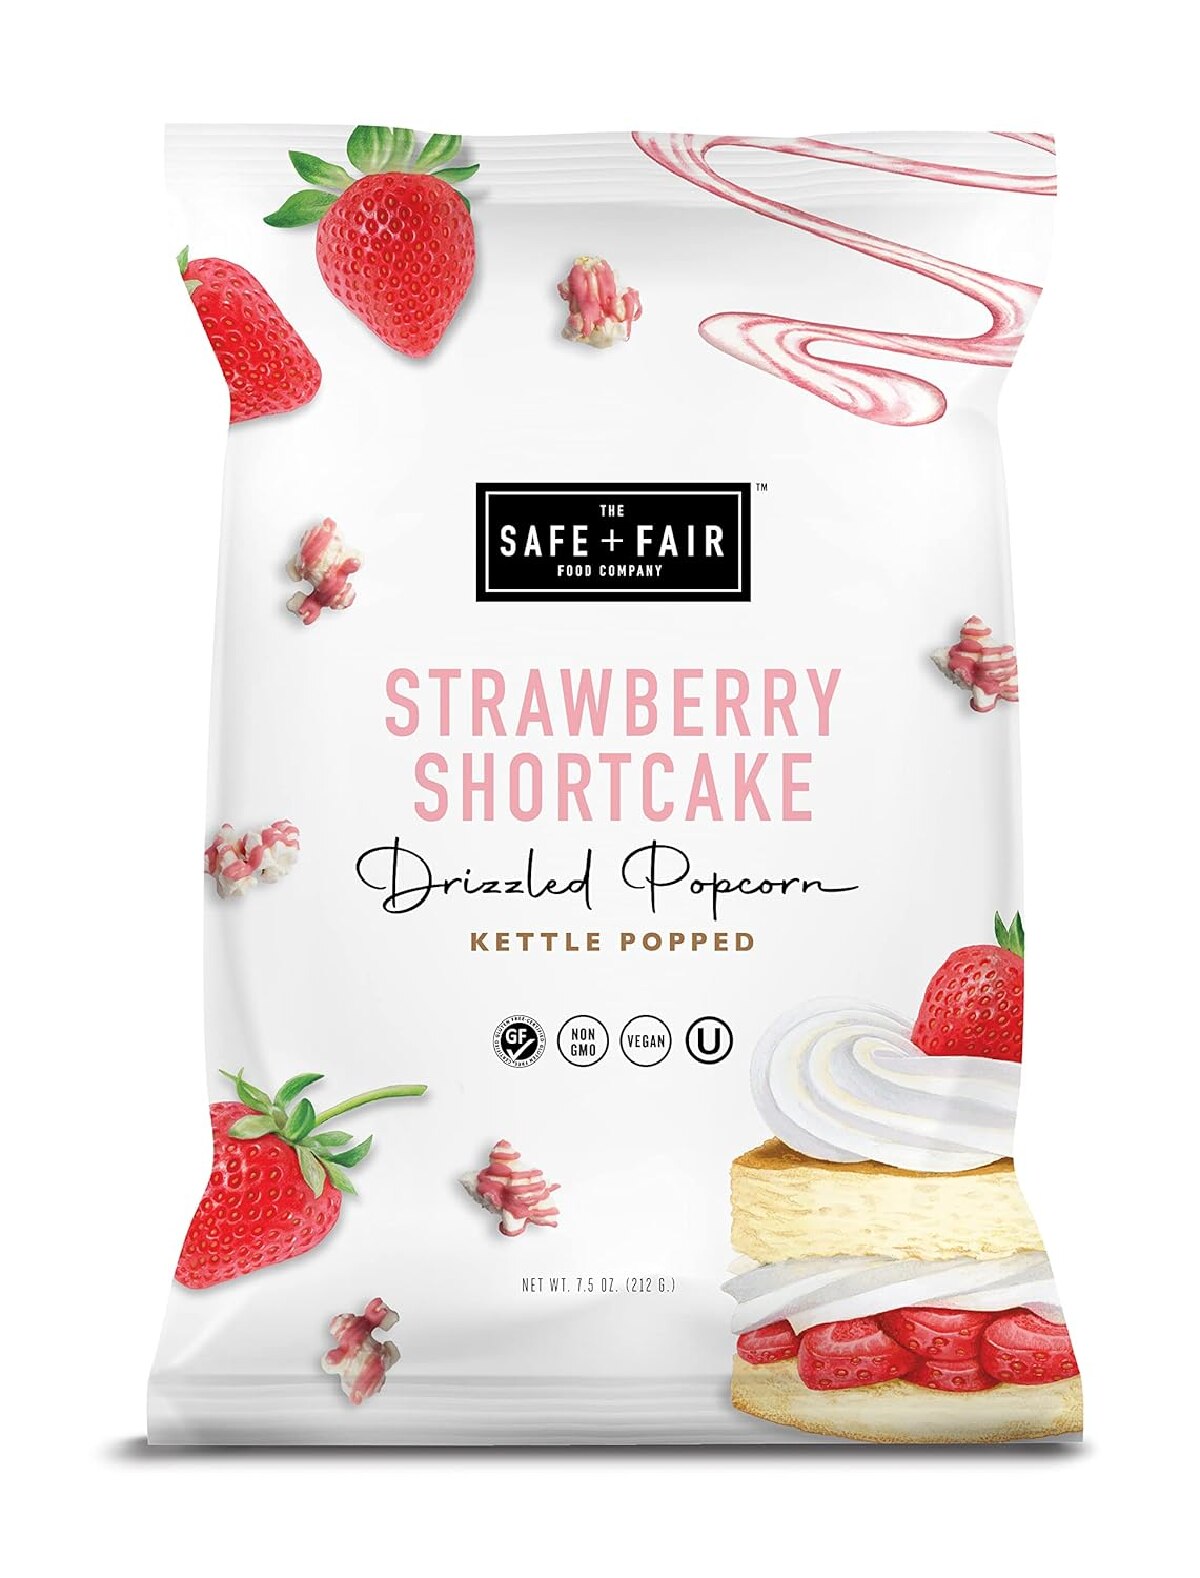 A white bag of Safe and Fair vegan popcorn in Strawberry Shortcake flavor against a white background. 